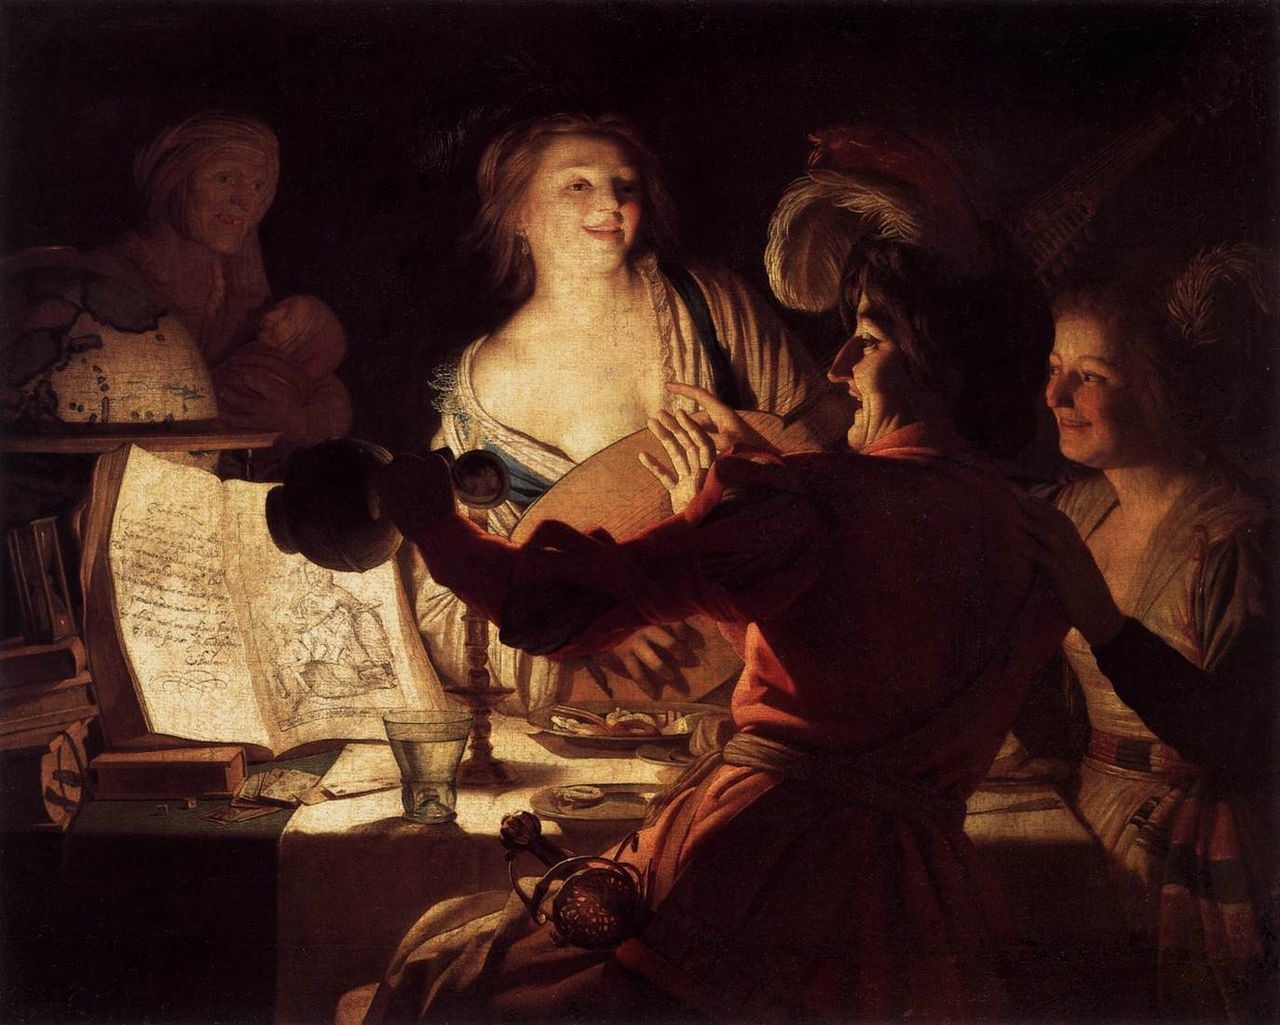 Sex and Music: The Renaissance and Early Baroque